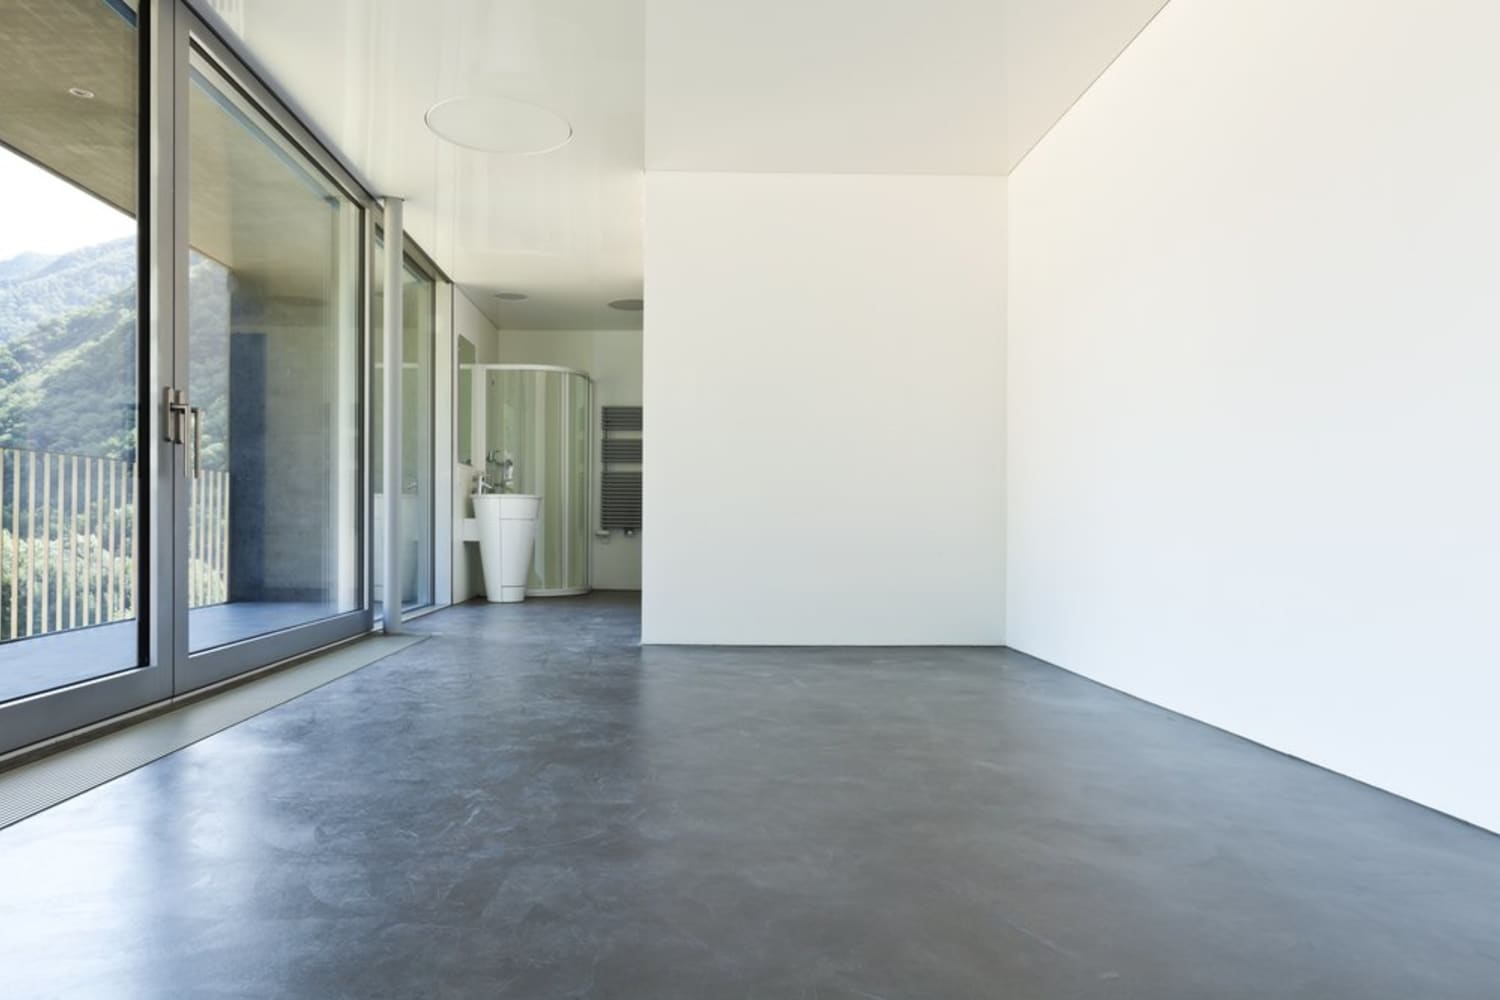 How Much Does it Cost to Install a Polished Concrete Floor